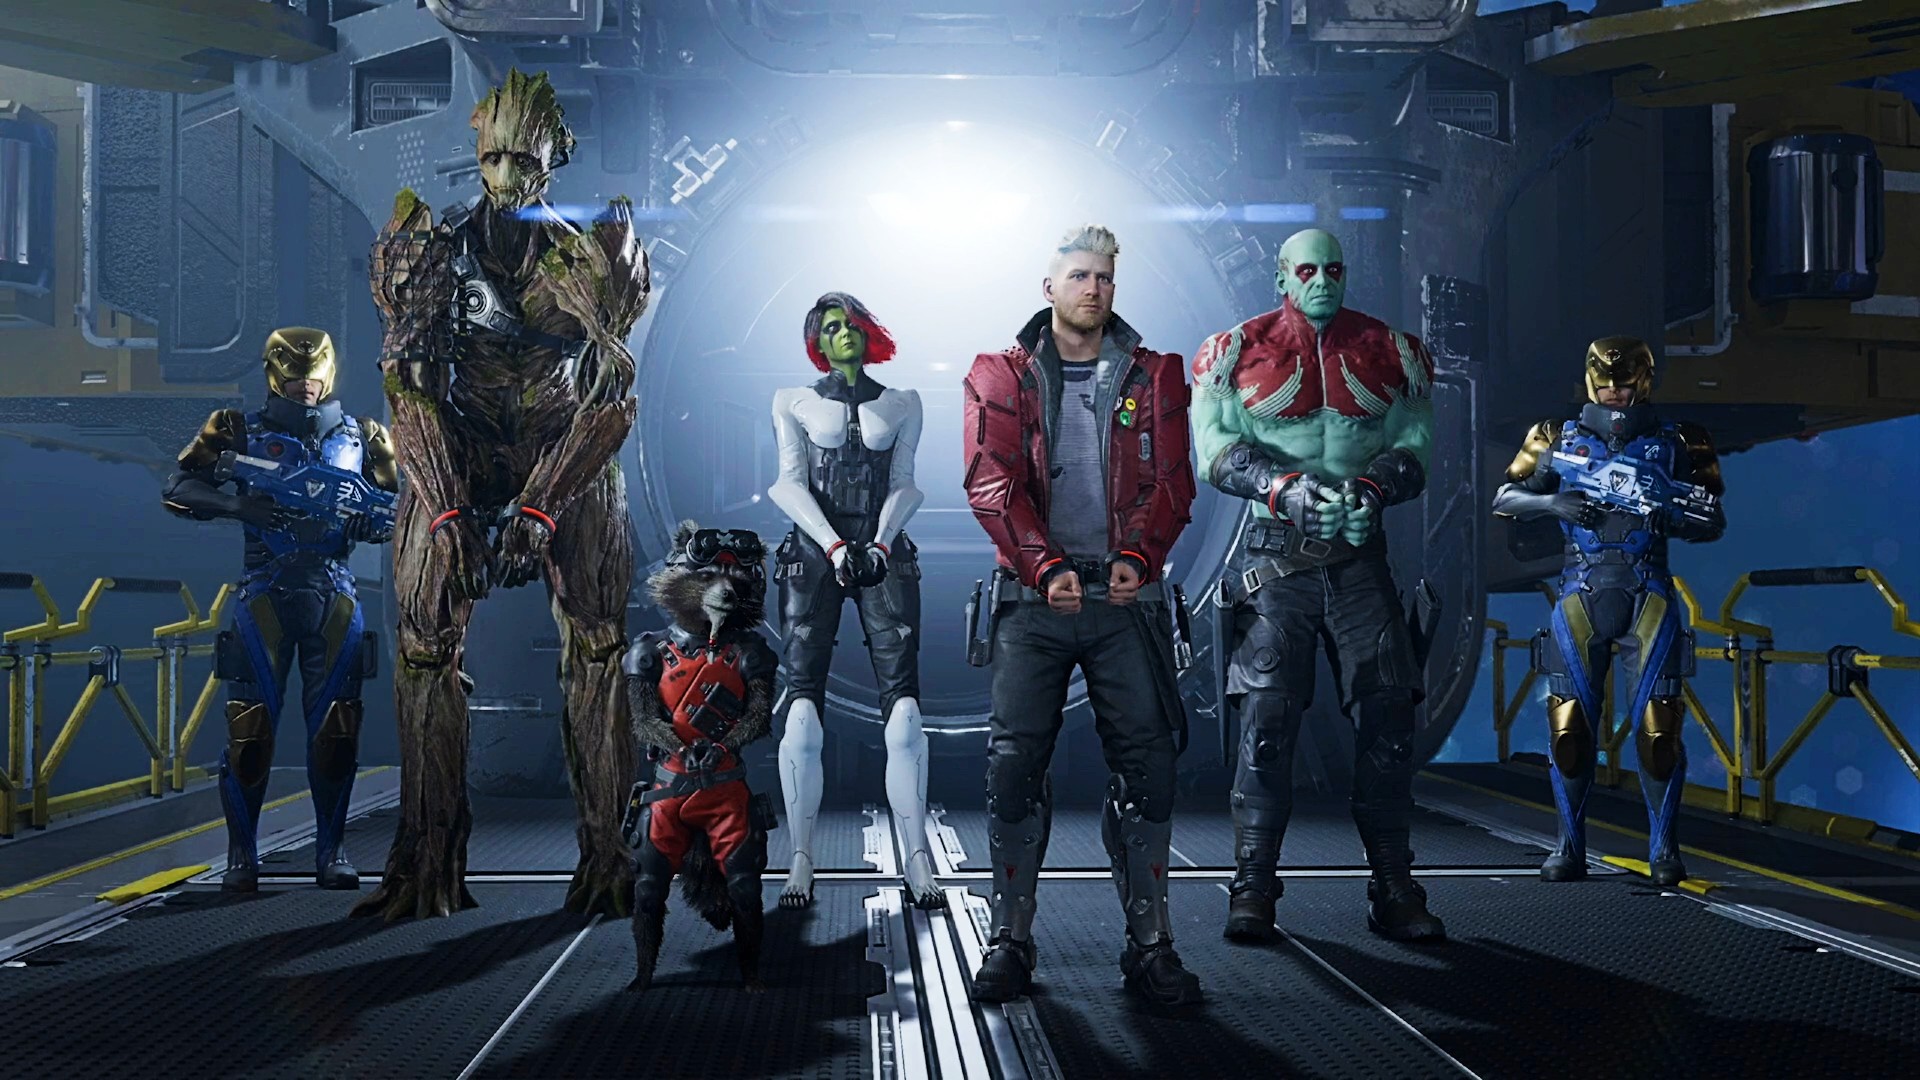 The Guardians of the Galaxy game won't have DLC or microtransactions